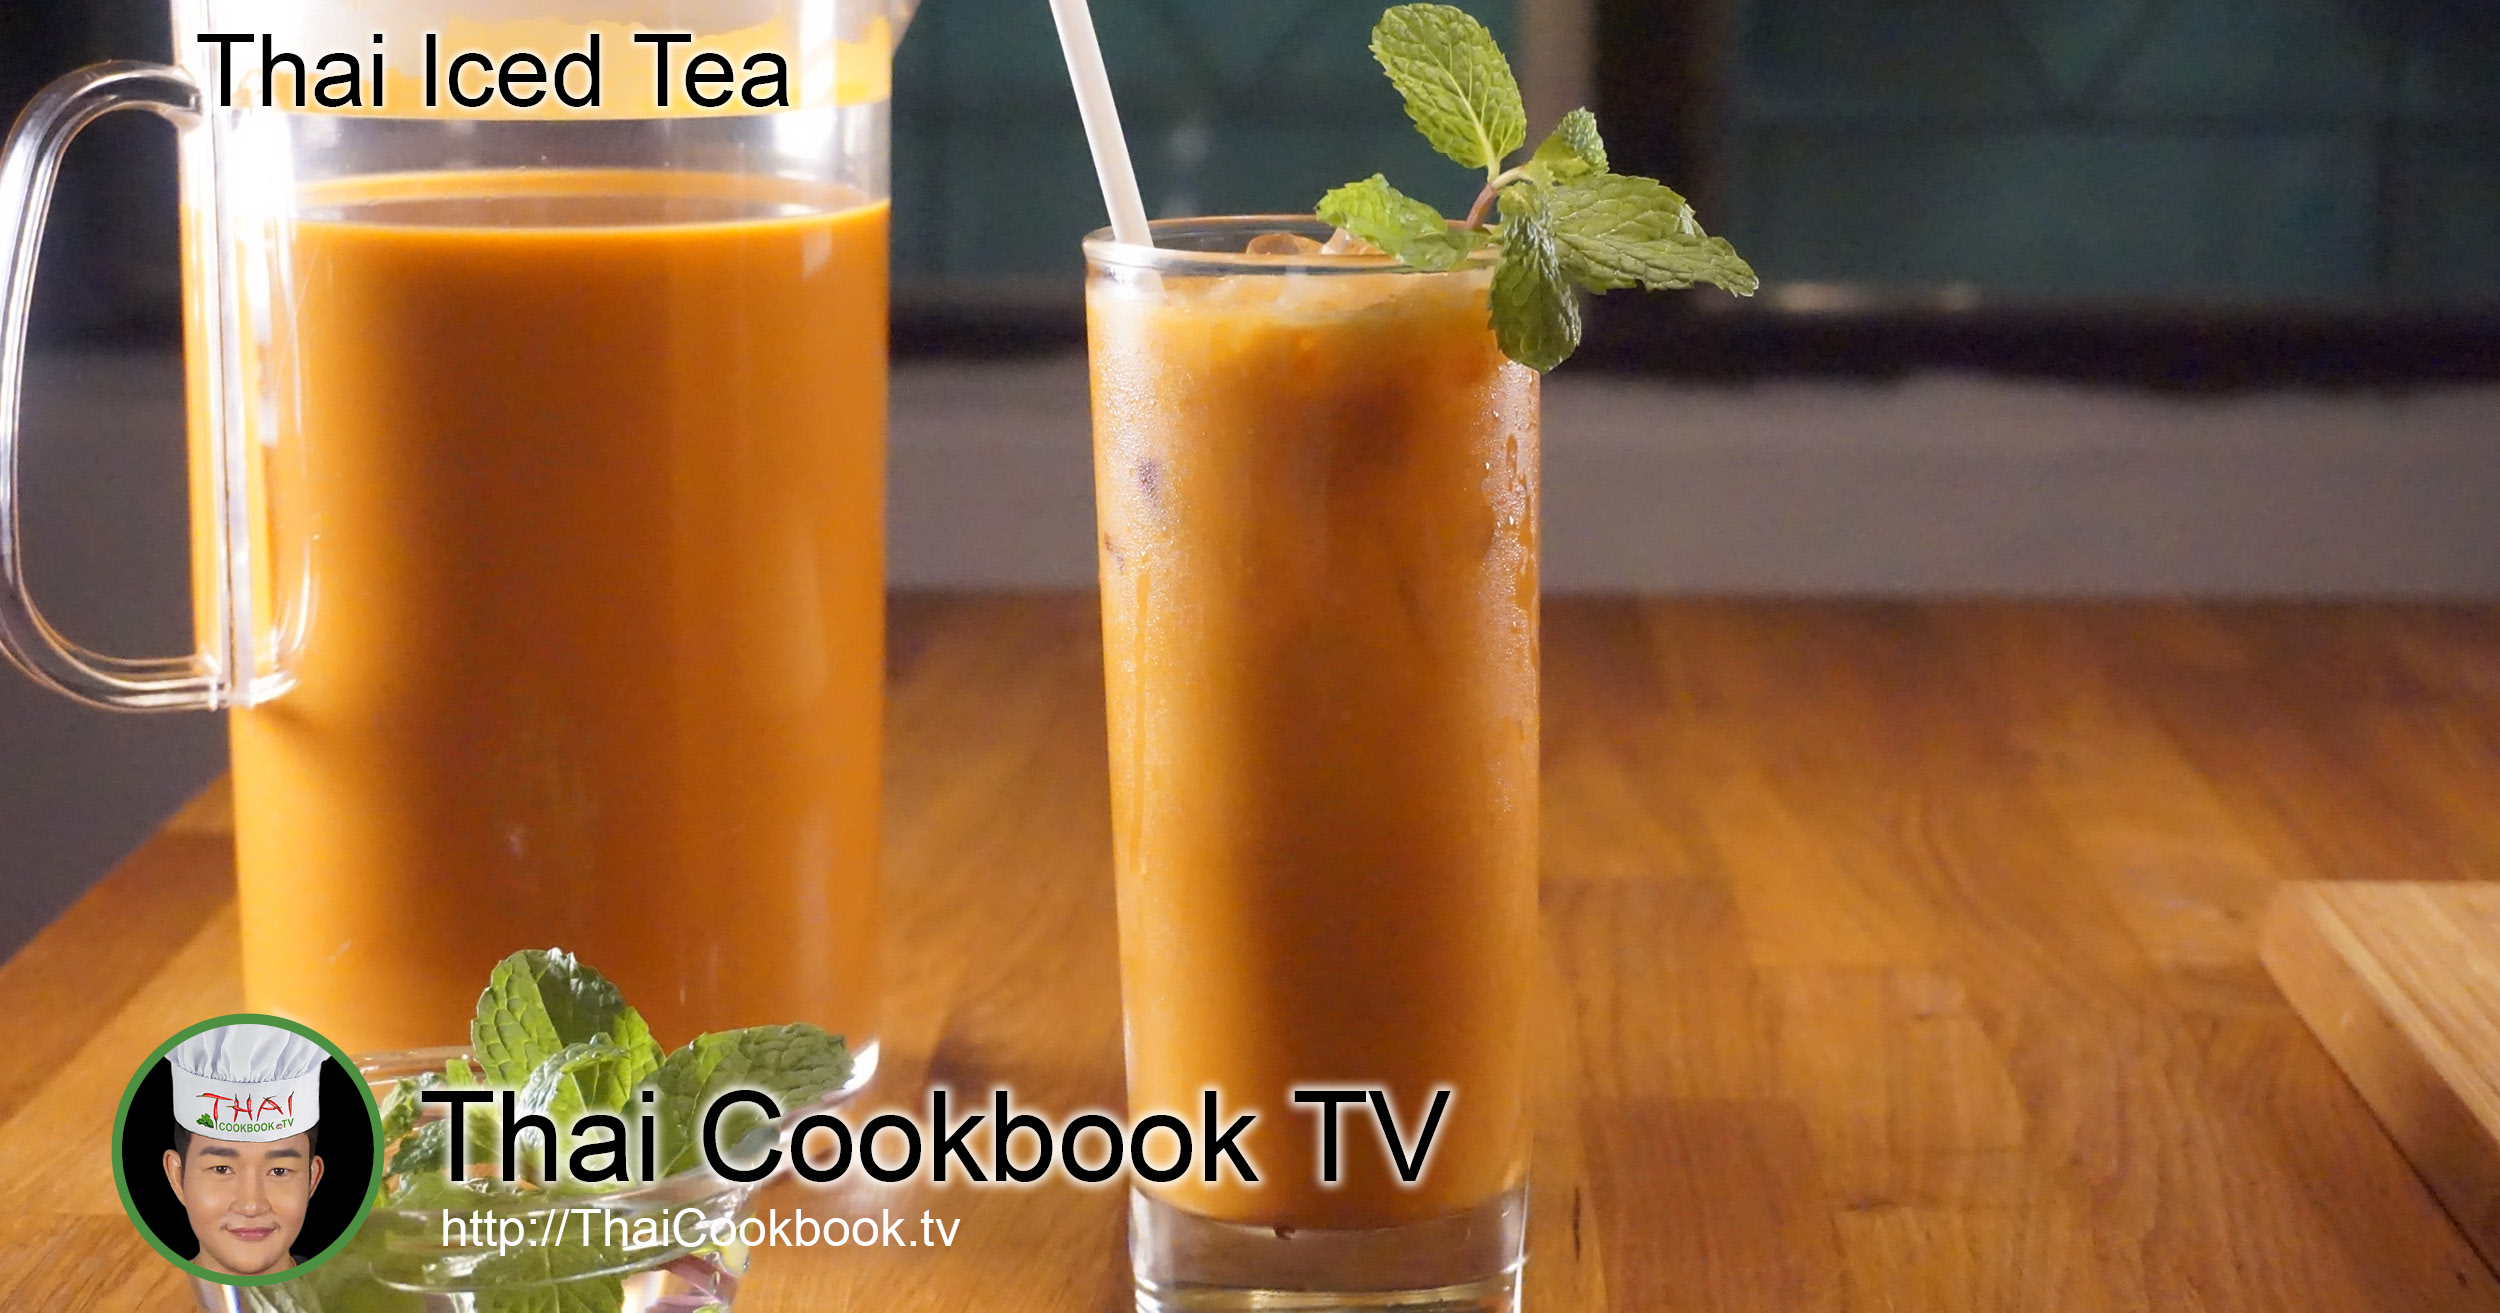 Cha Tra Mue - 400g Thai Tea Filter Stainless Steel Traditional Thai Style with Number One The Original Thai Iced Tea Mix